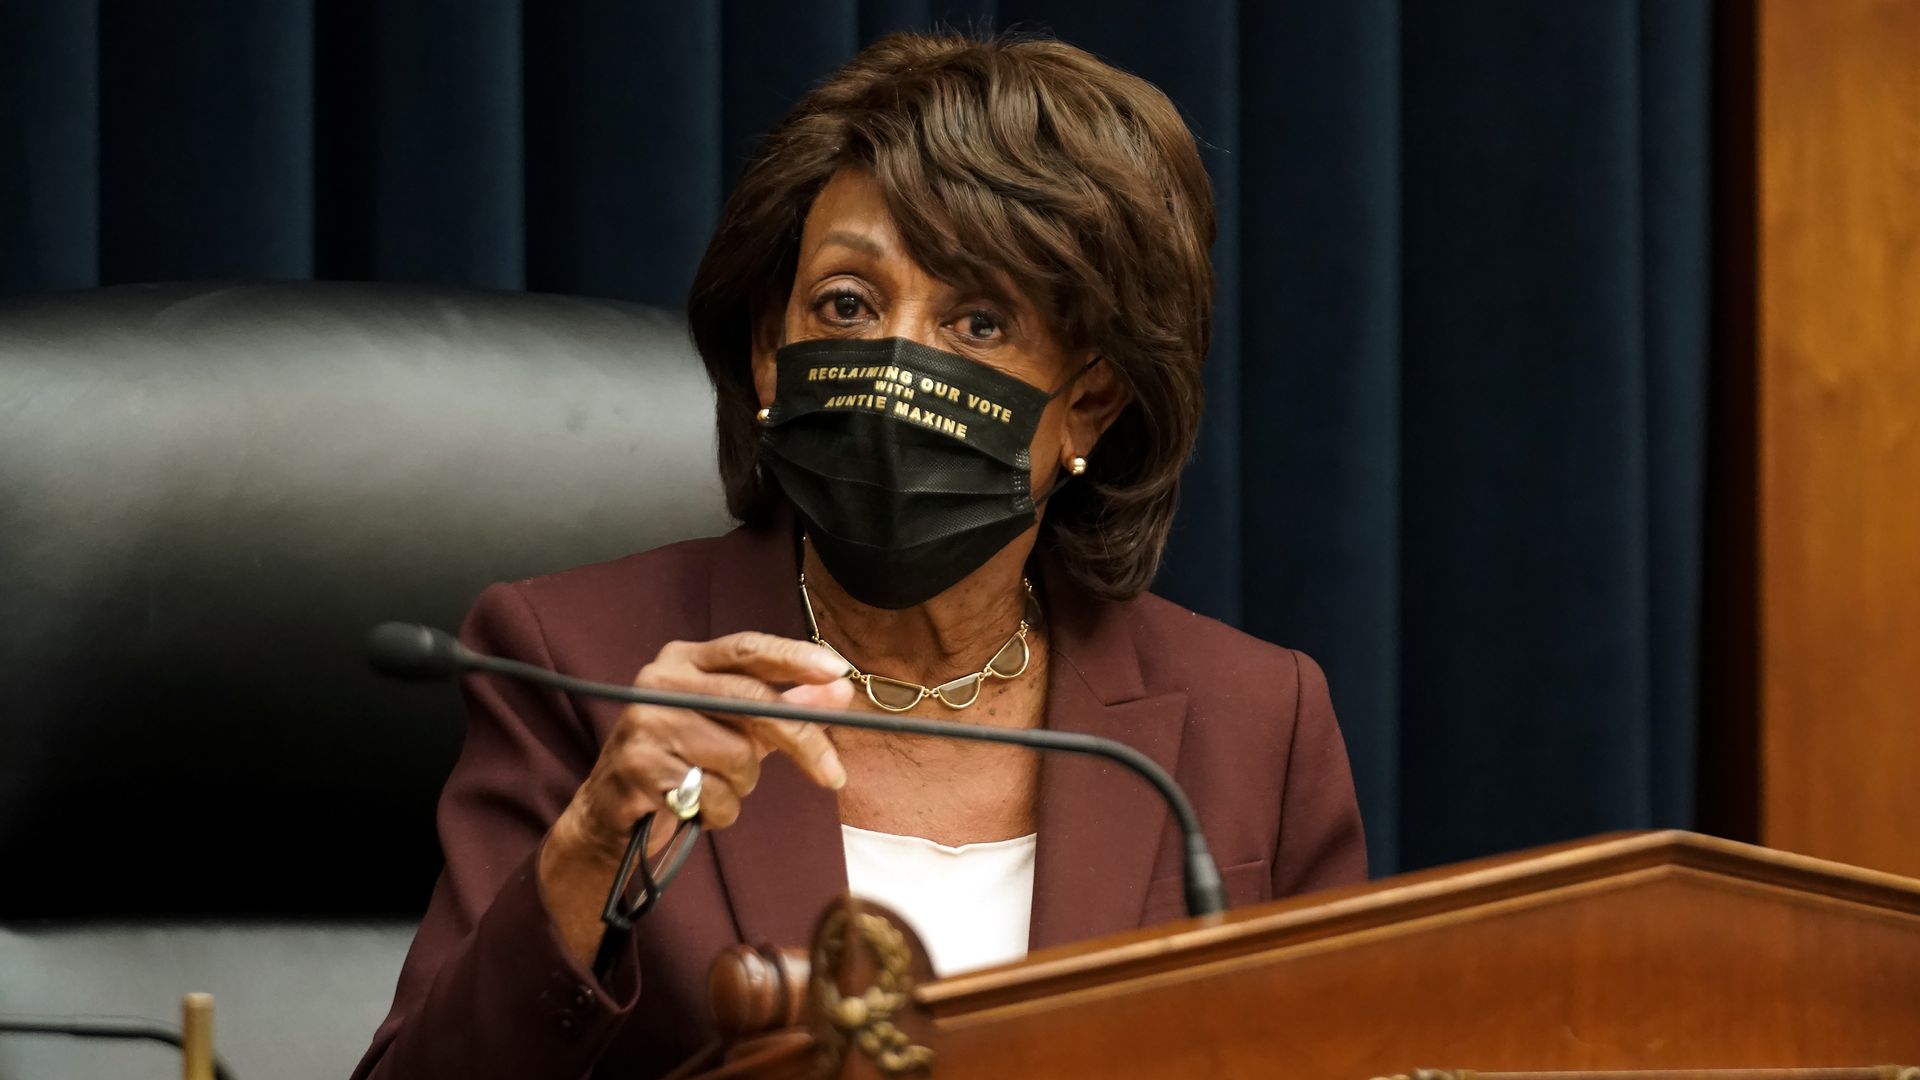 Photo of Rep. Maxine Waters, masked at a podium during a hearing